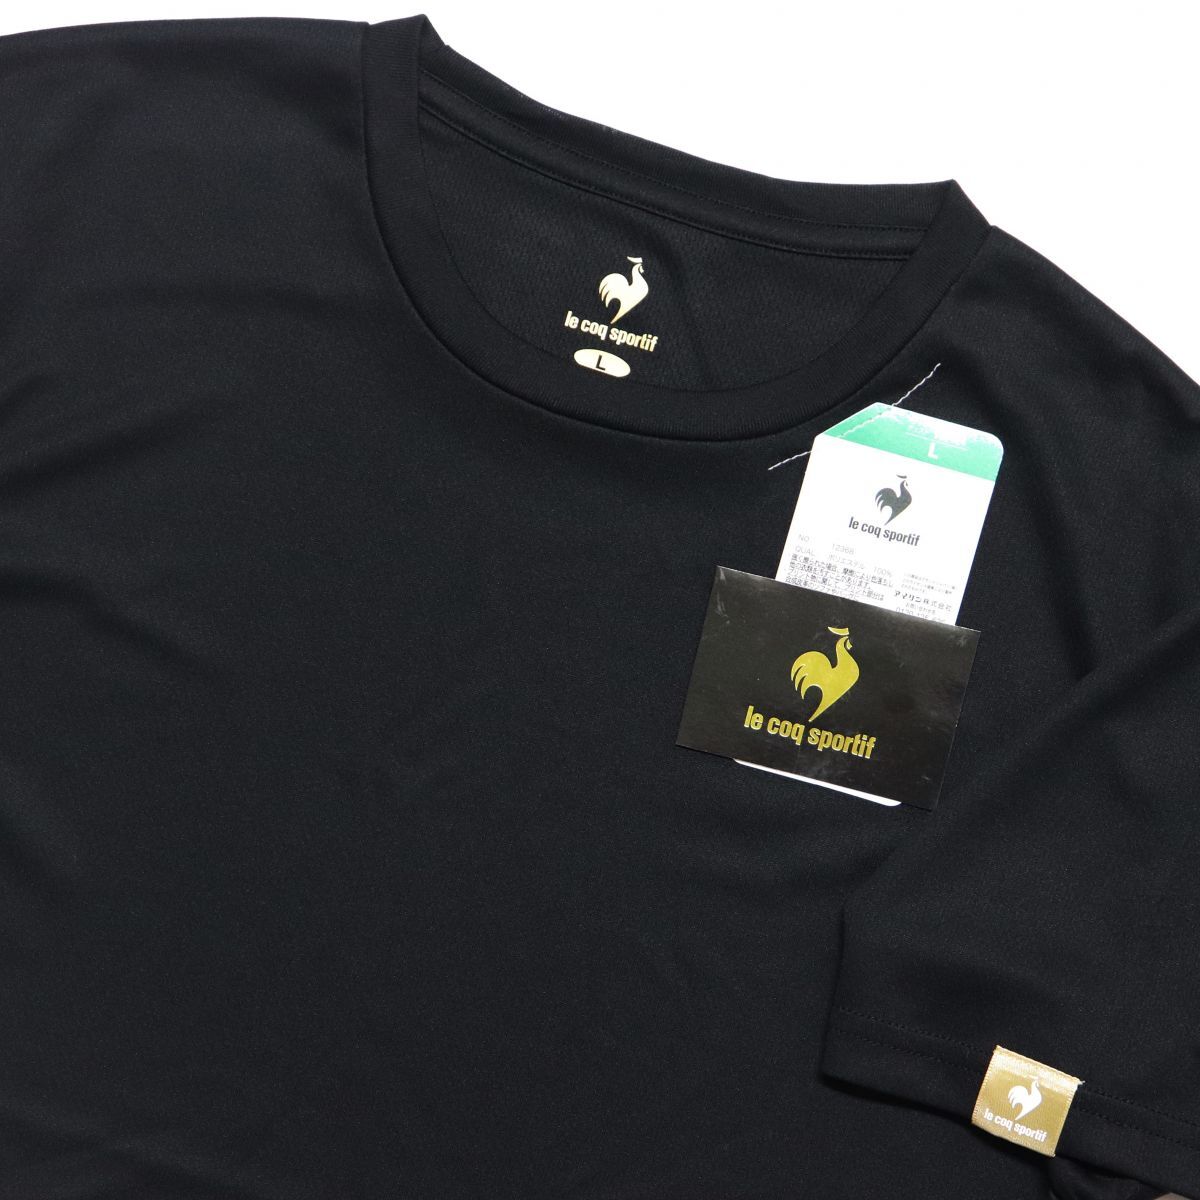 * postage 390 jpy possibility commodity Le Coq le coq sportif new goods men's training short sleeves T-shirt wear black L size [12368-BLK-L] one three .*QWER